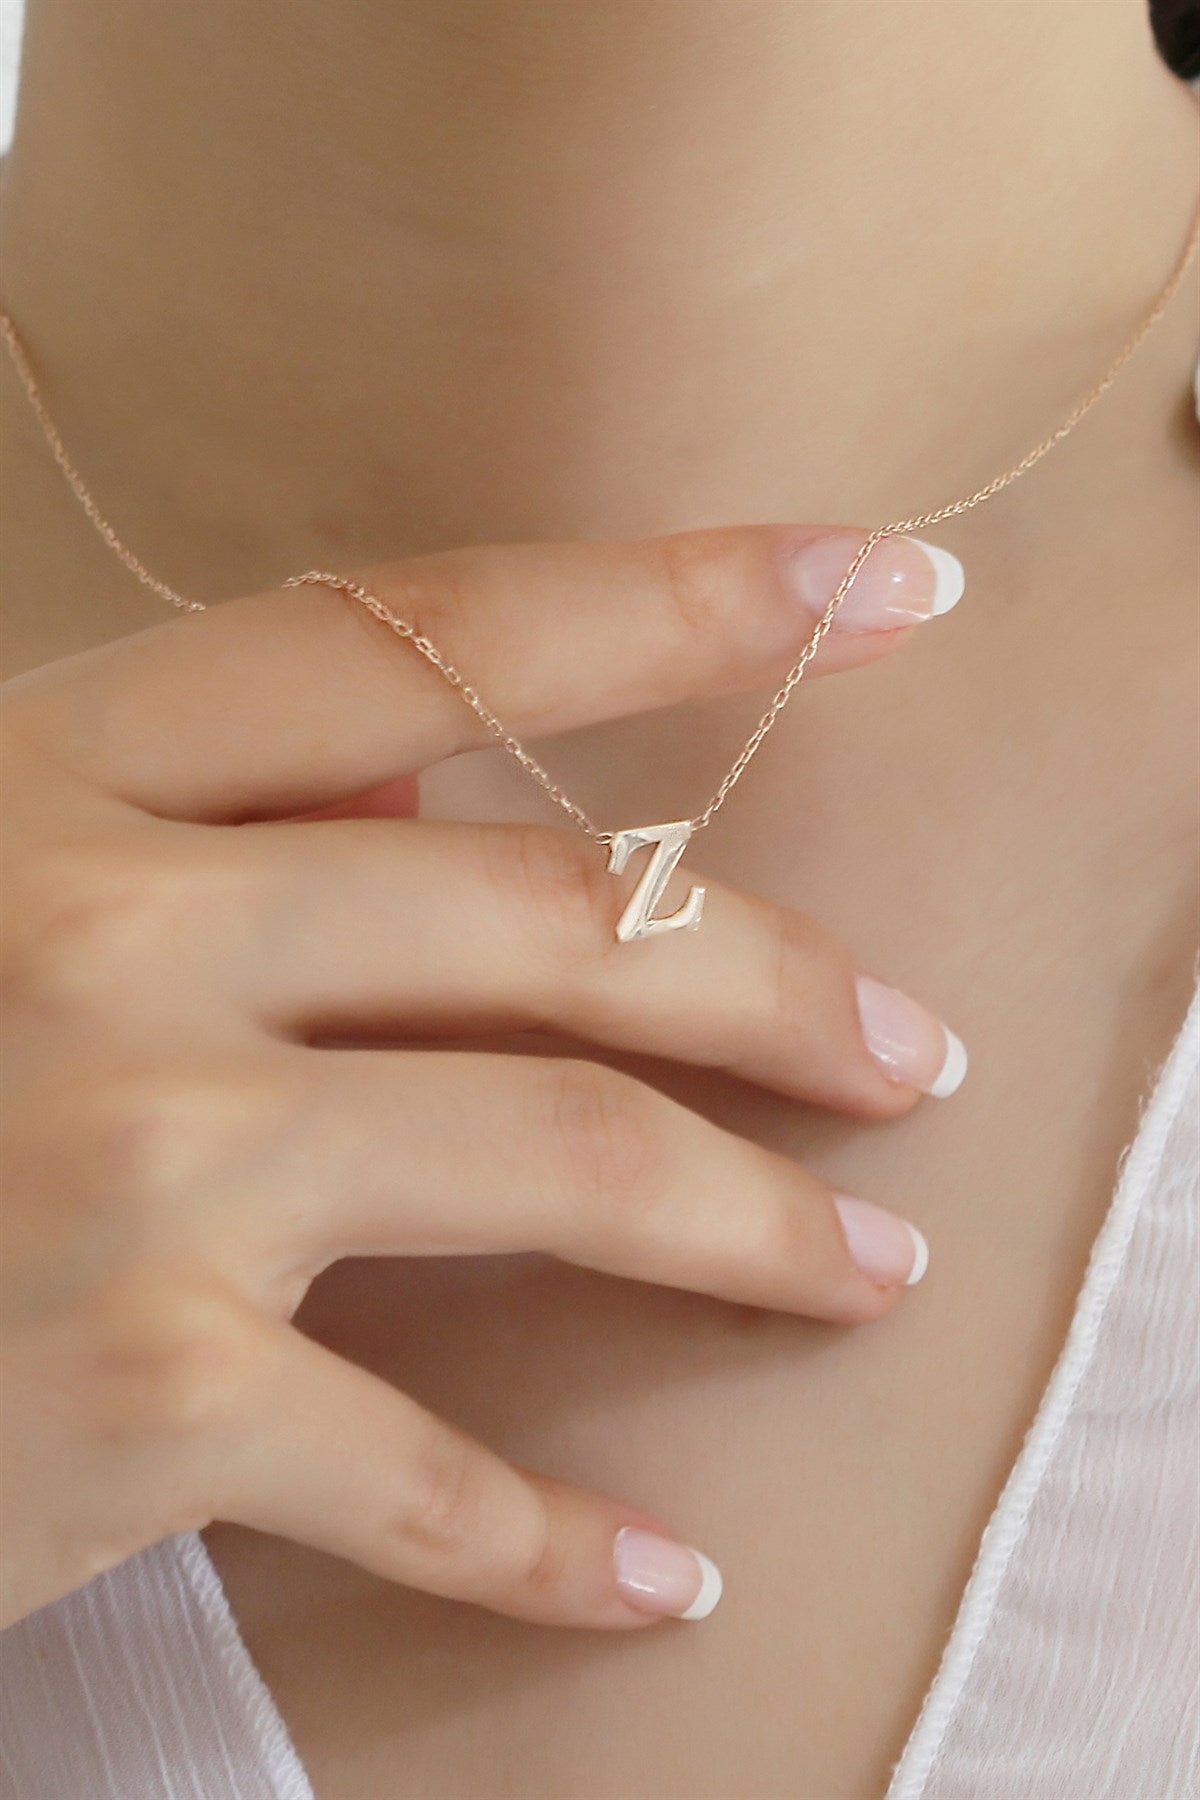 Silver Initial Necklace